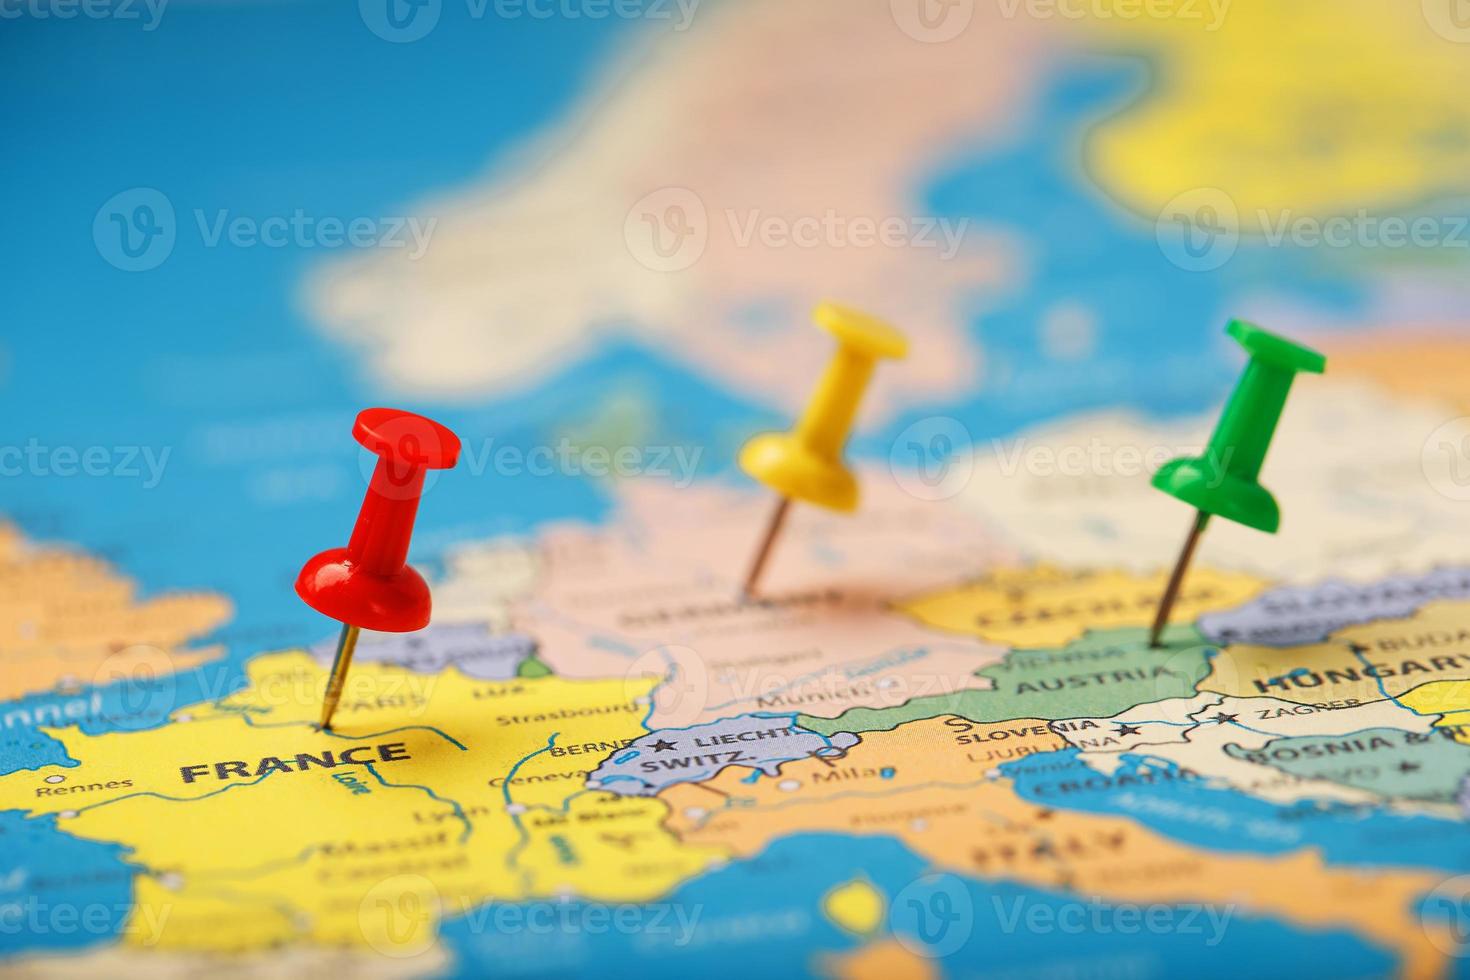 On the map of Europe, the colored buttons indicate the location and coordinates of the destination photo